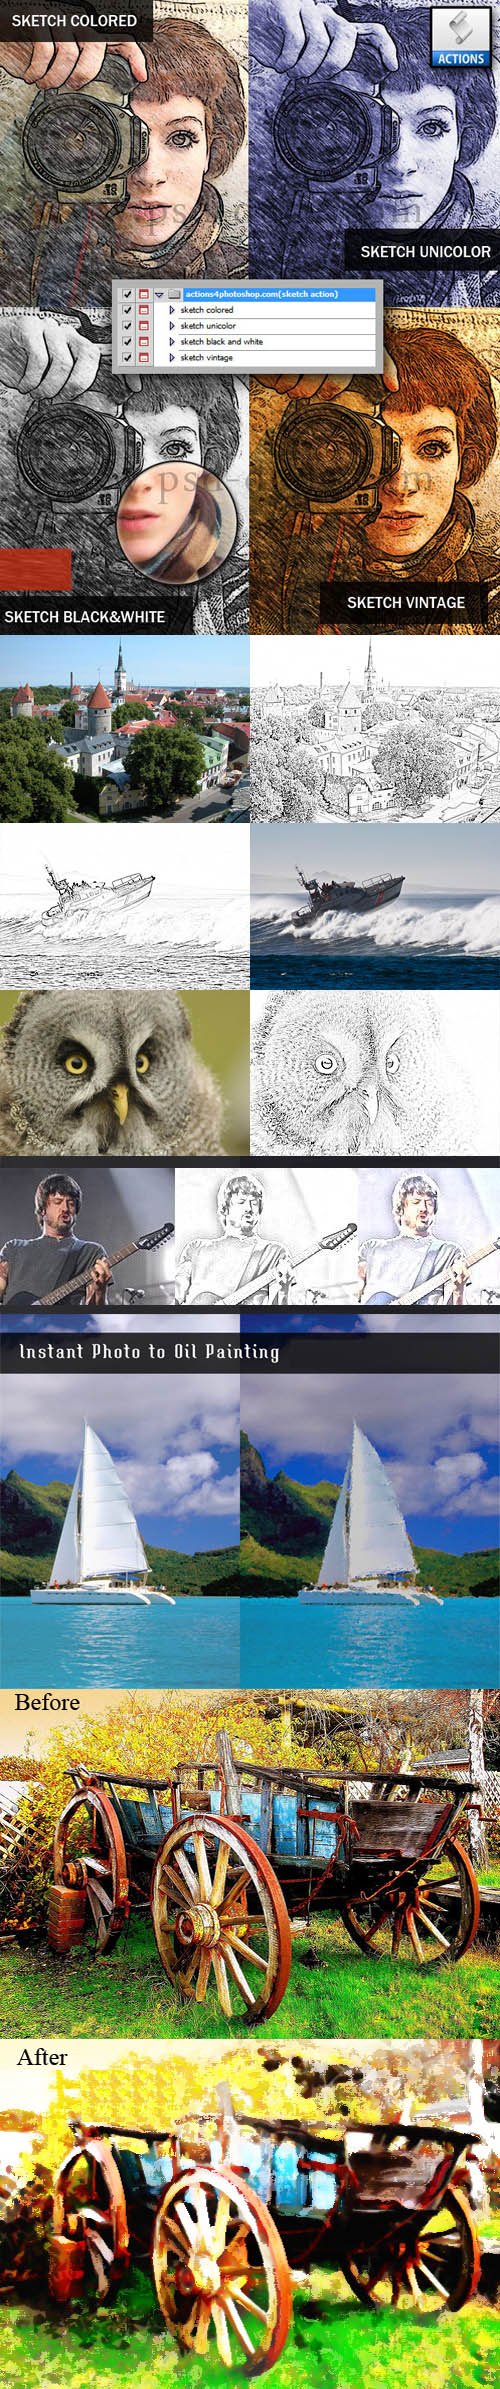 Awesome Sketch & Painting Effects - Photoshop Actions